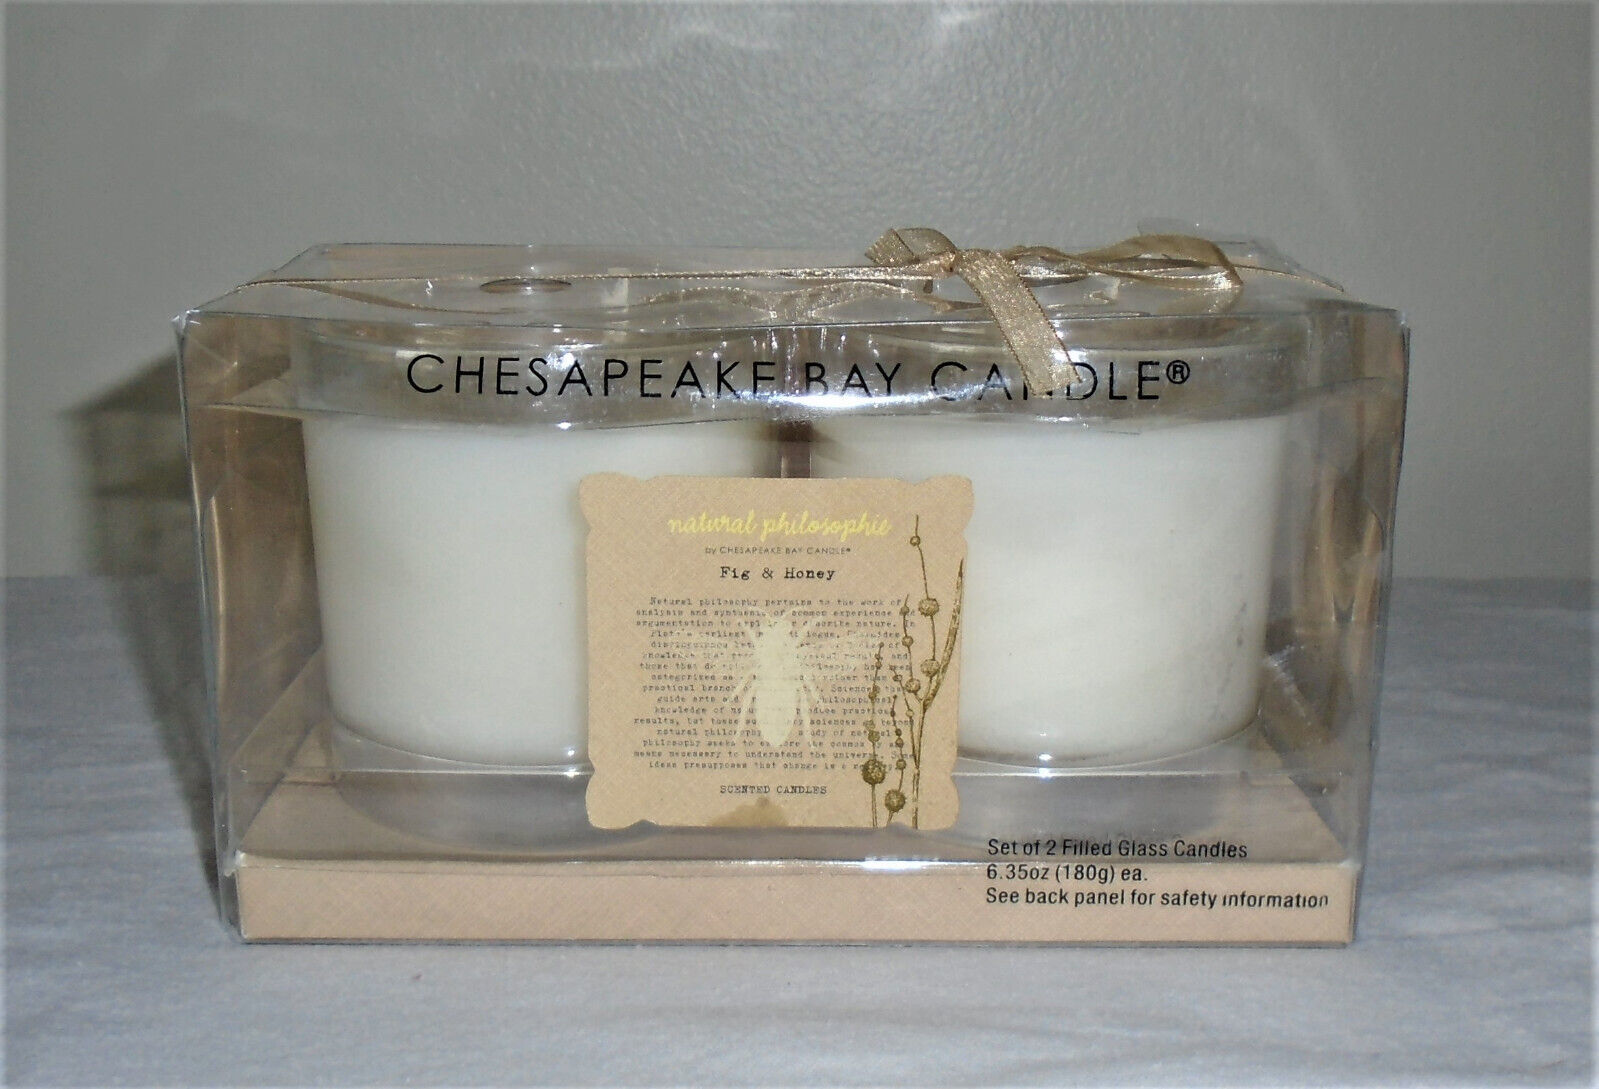 Primary image for Chesapeake Bay Natural Philosophie Candles Fig and Honey Set of 2 Single Wick